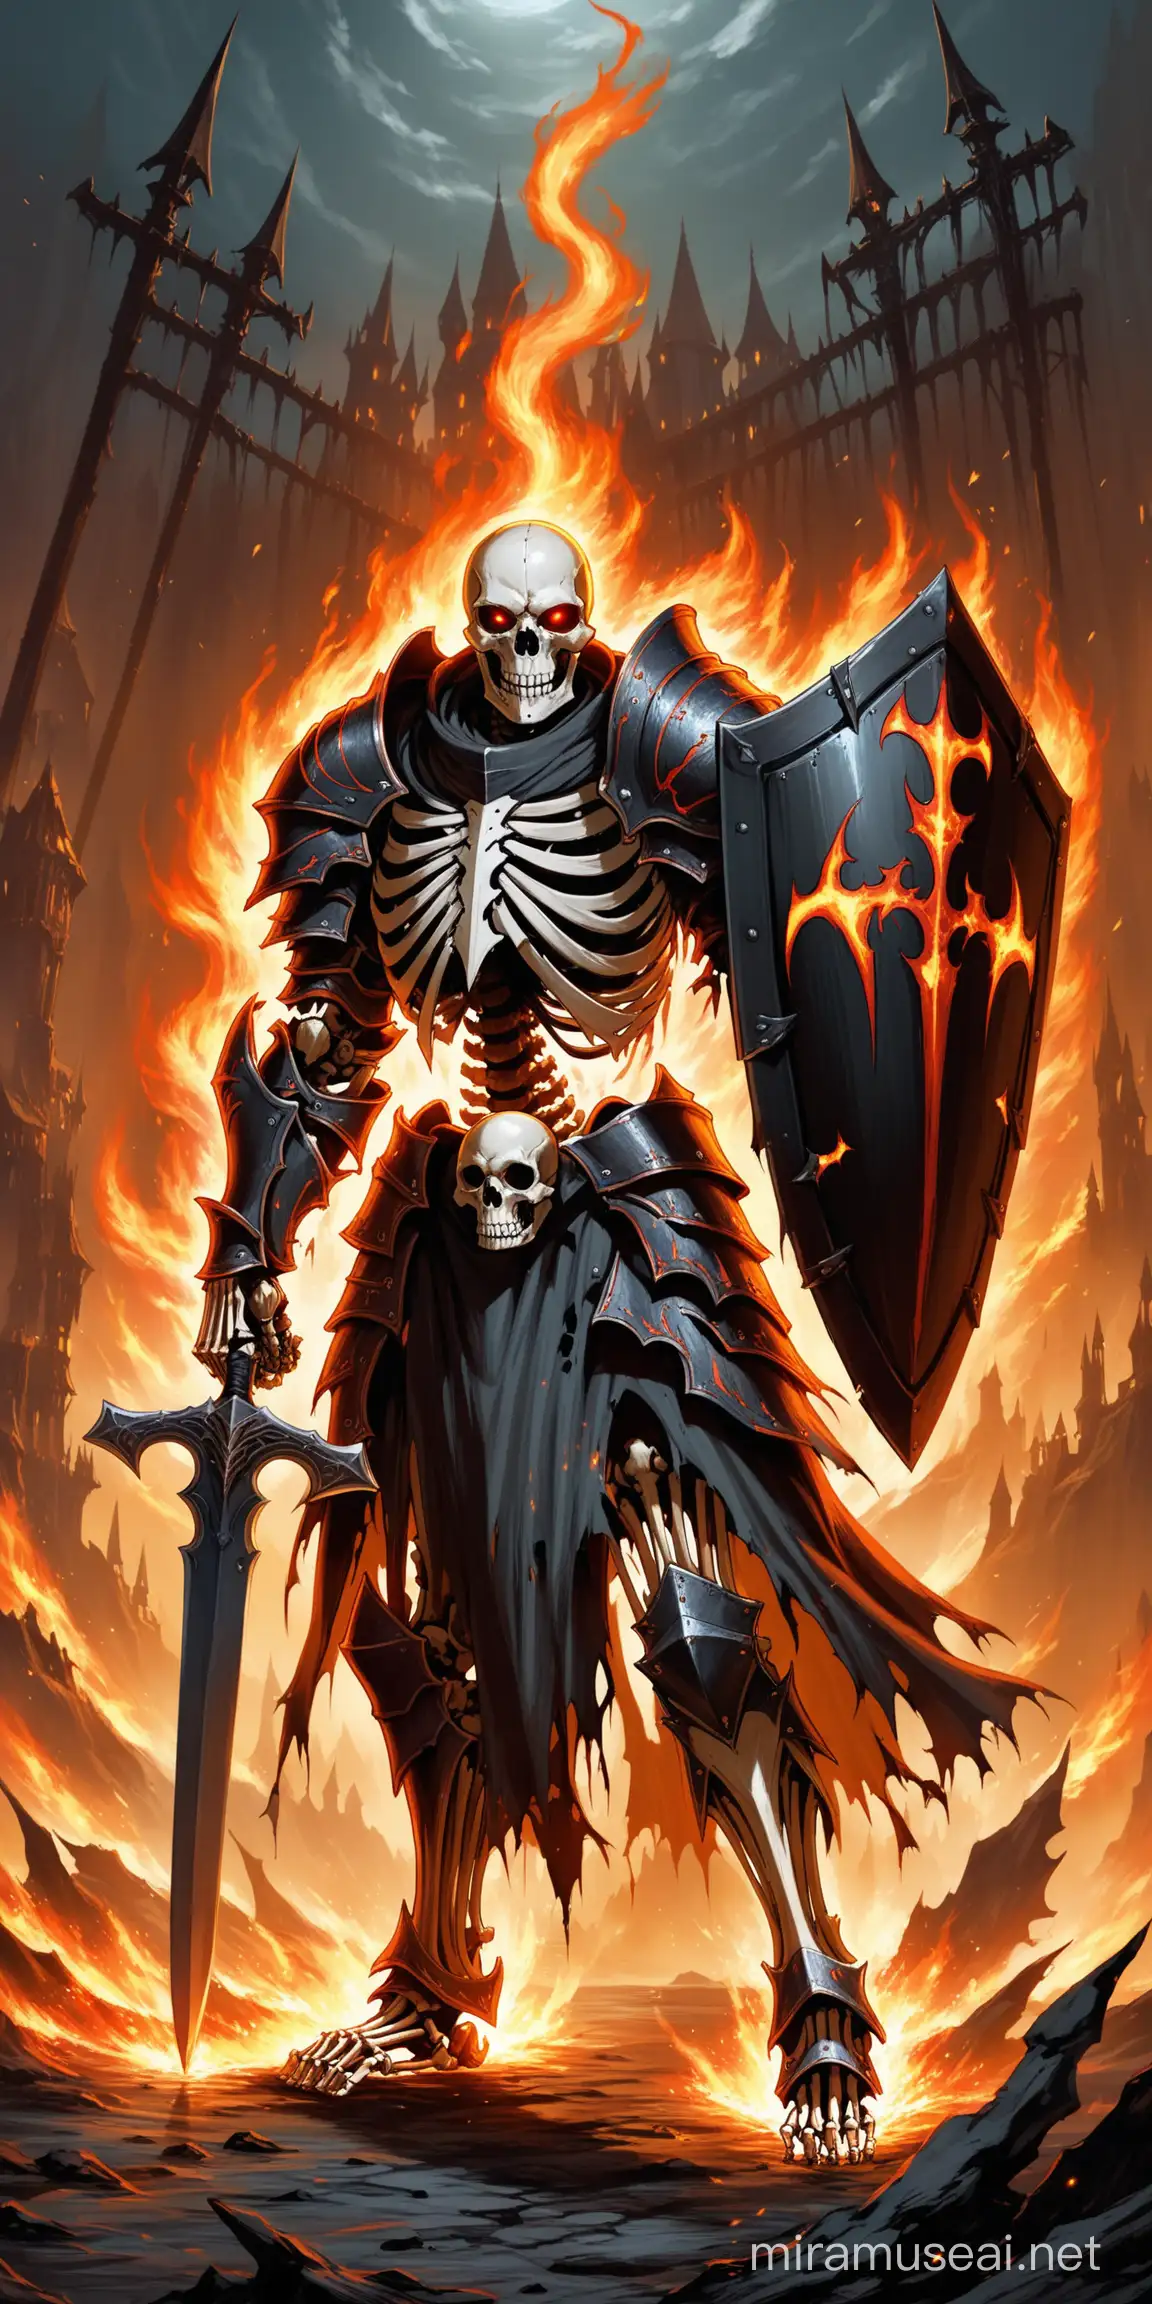 concept art, stalfos, skeleton knight, white bones, warn armor and torn cloth falling off his bones, red eyes of fire, blade in his right hand, iron shield with rivets on his left arm, guarded stance